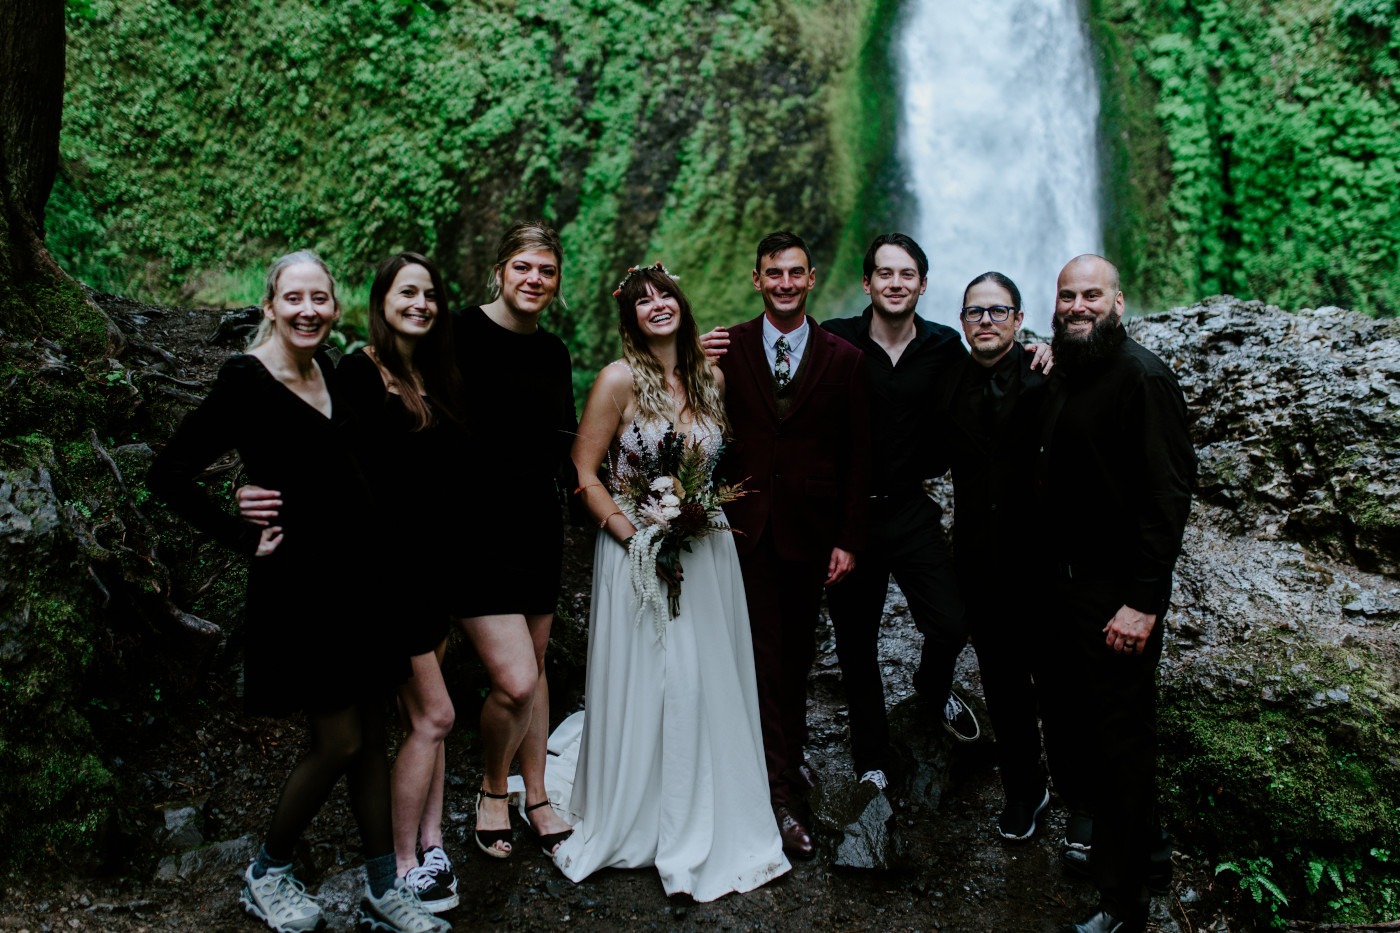 A group photo of the elopement wedding party at Wahcella Falls.